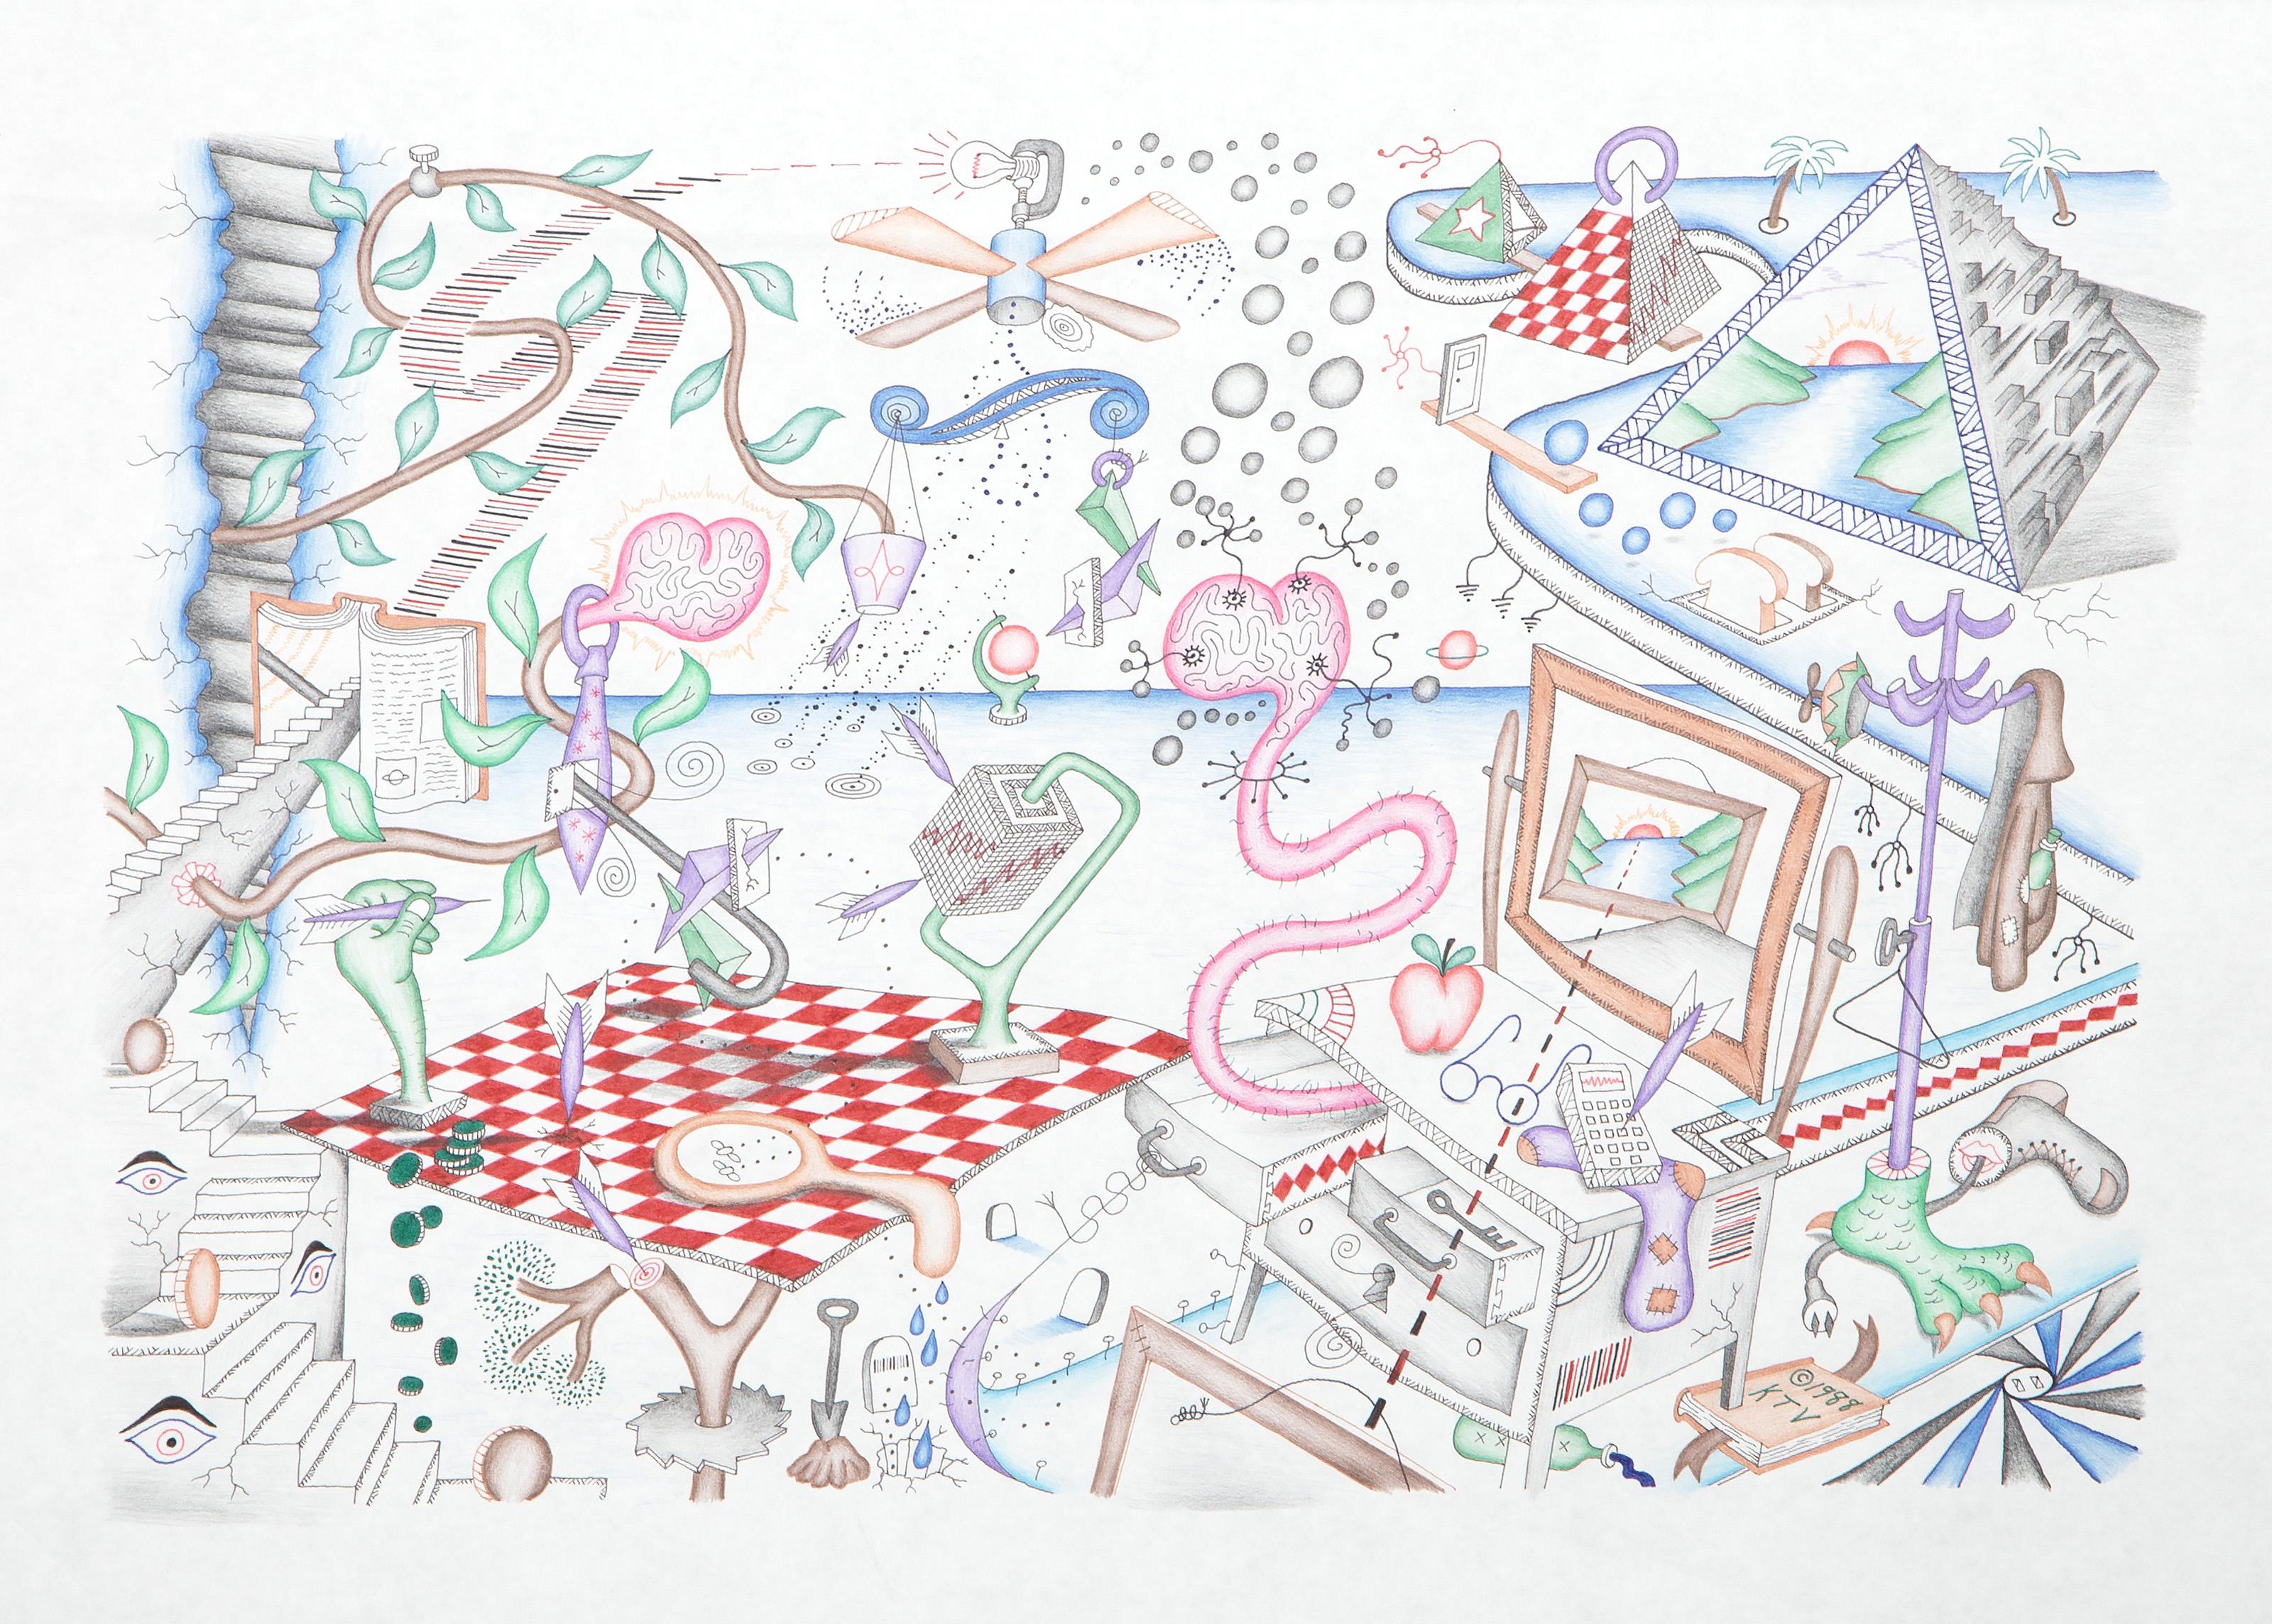 Kevin Varner, American (1954 - 2019) -  The Discovery of Superconductive Trapdoor Economics. Year: 1988, Medium: Color Pencil and Ink on Paper, signed and dated, titled on verso, Image Size: 12 x 18 inches, Size: 18 x 24 in. (45.72 x 60.96 cm) 